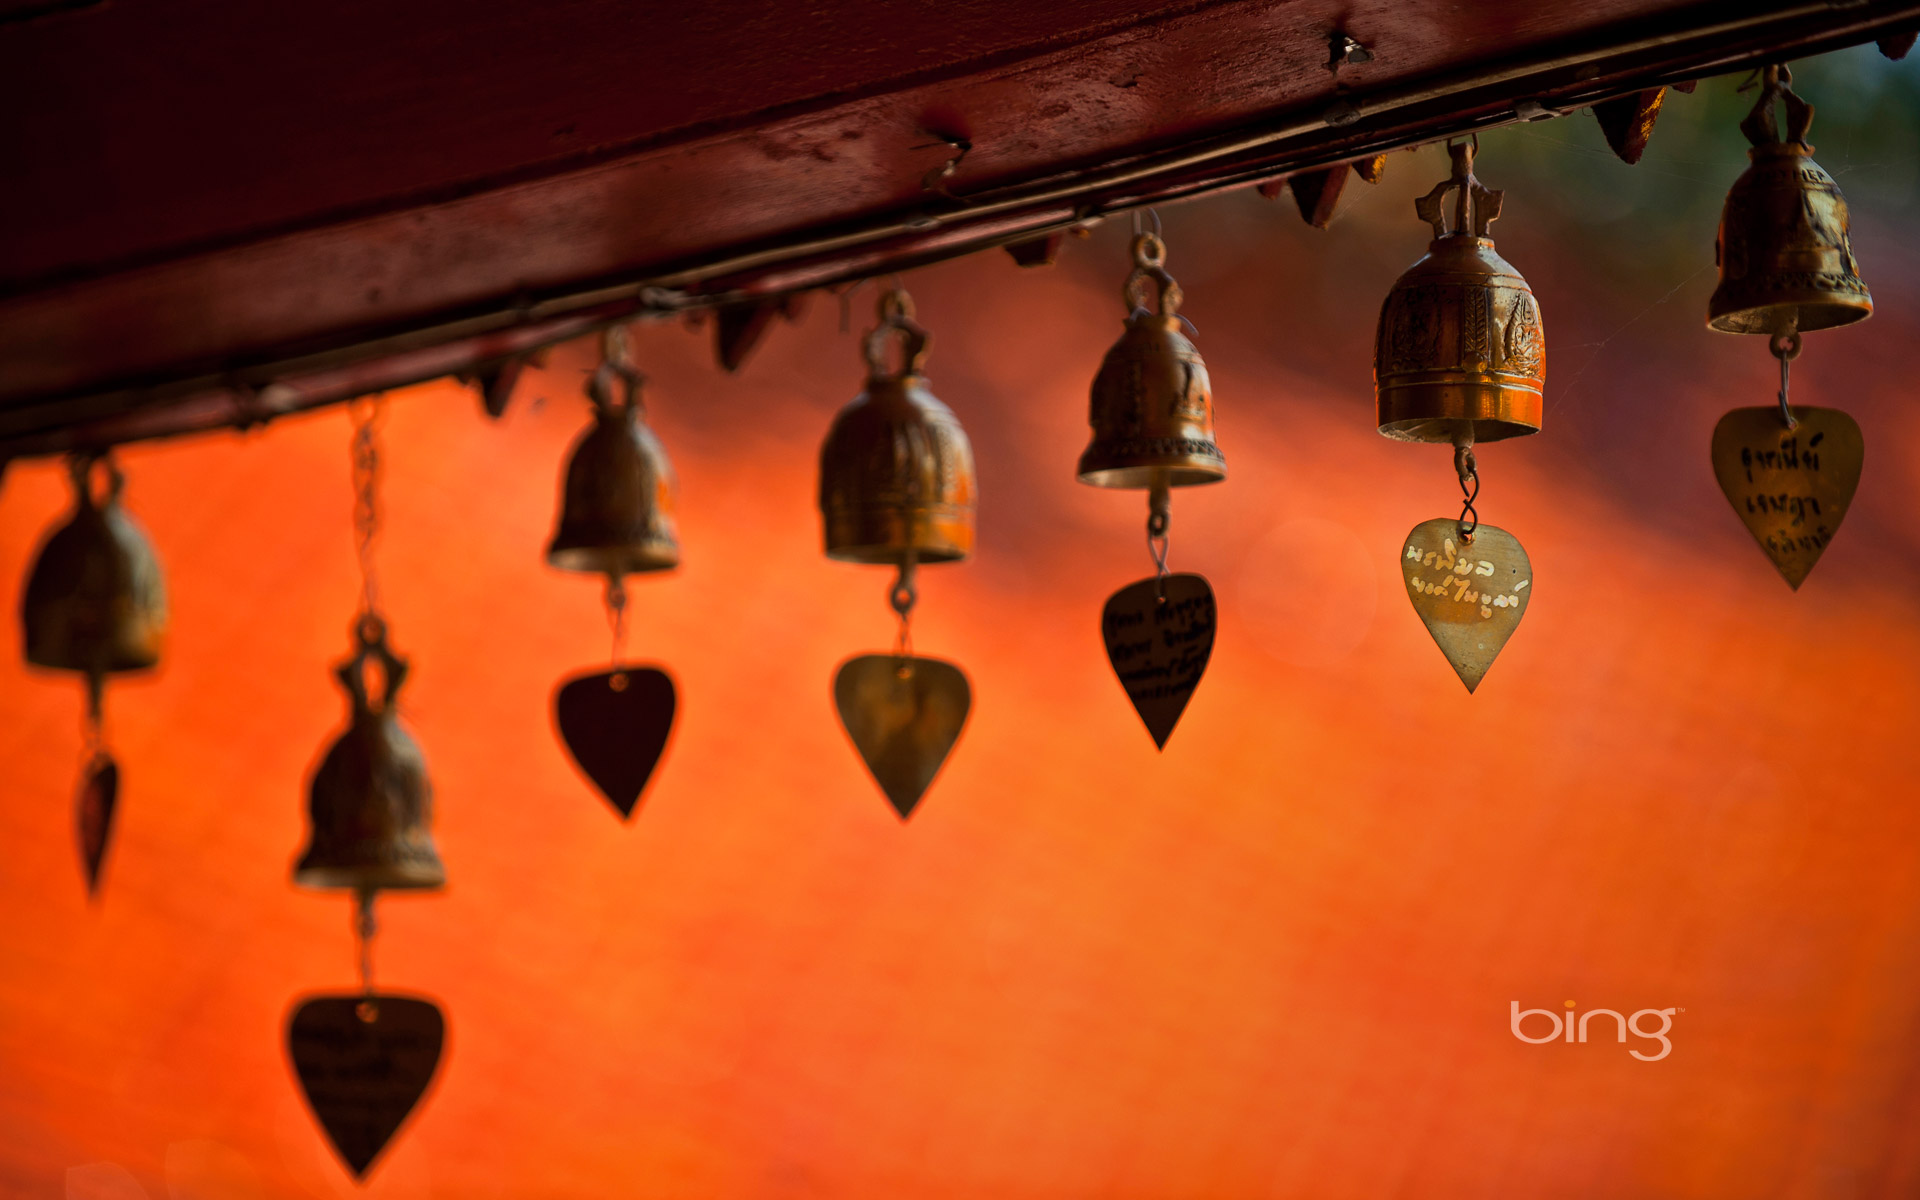 Temple bells and chimes, Chiang Mai, Thailand